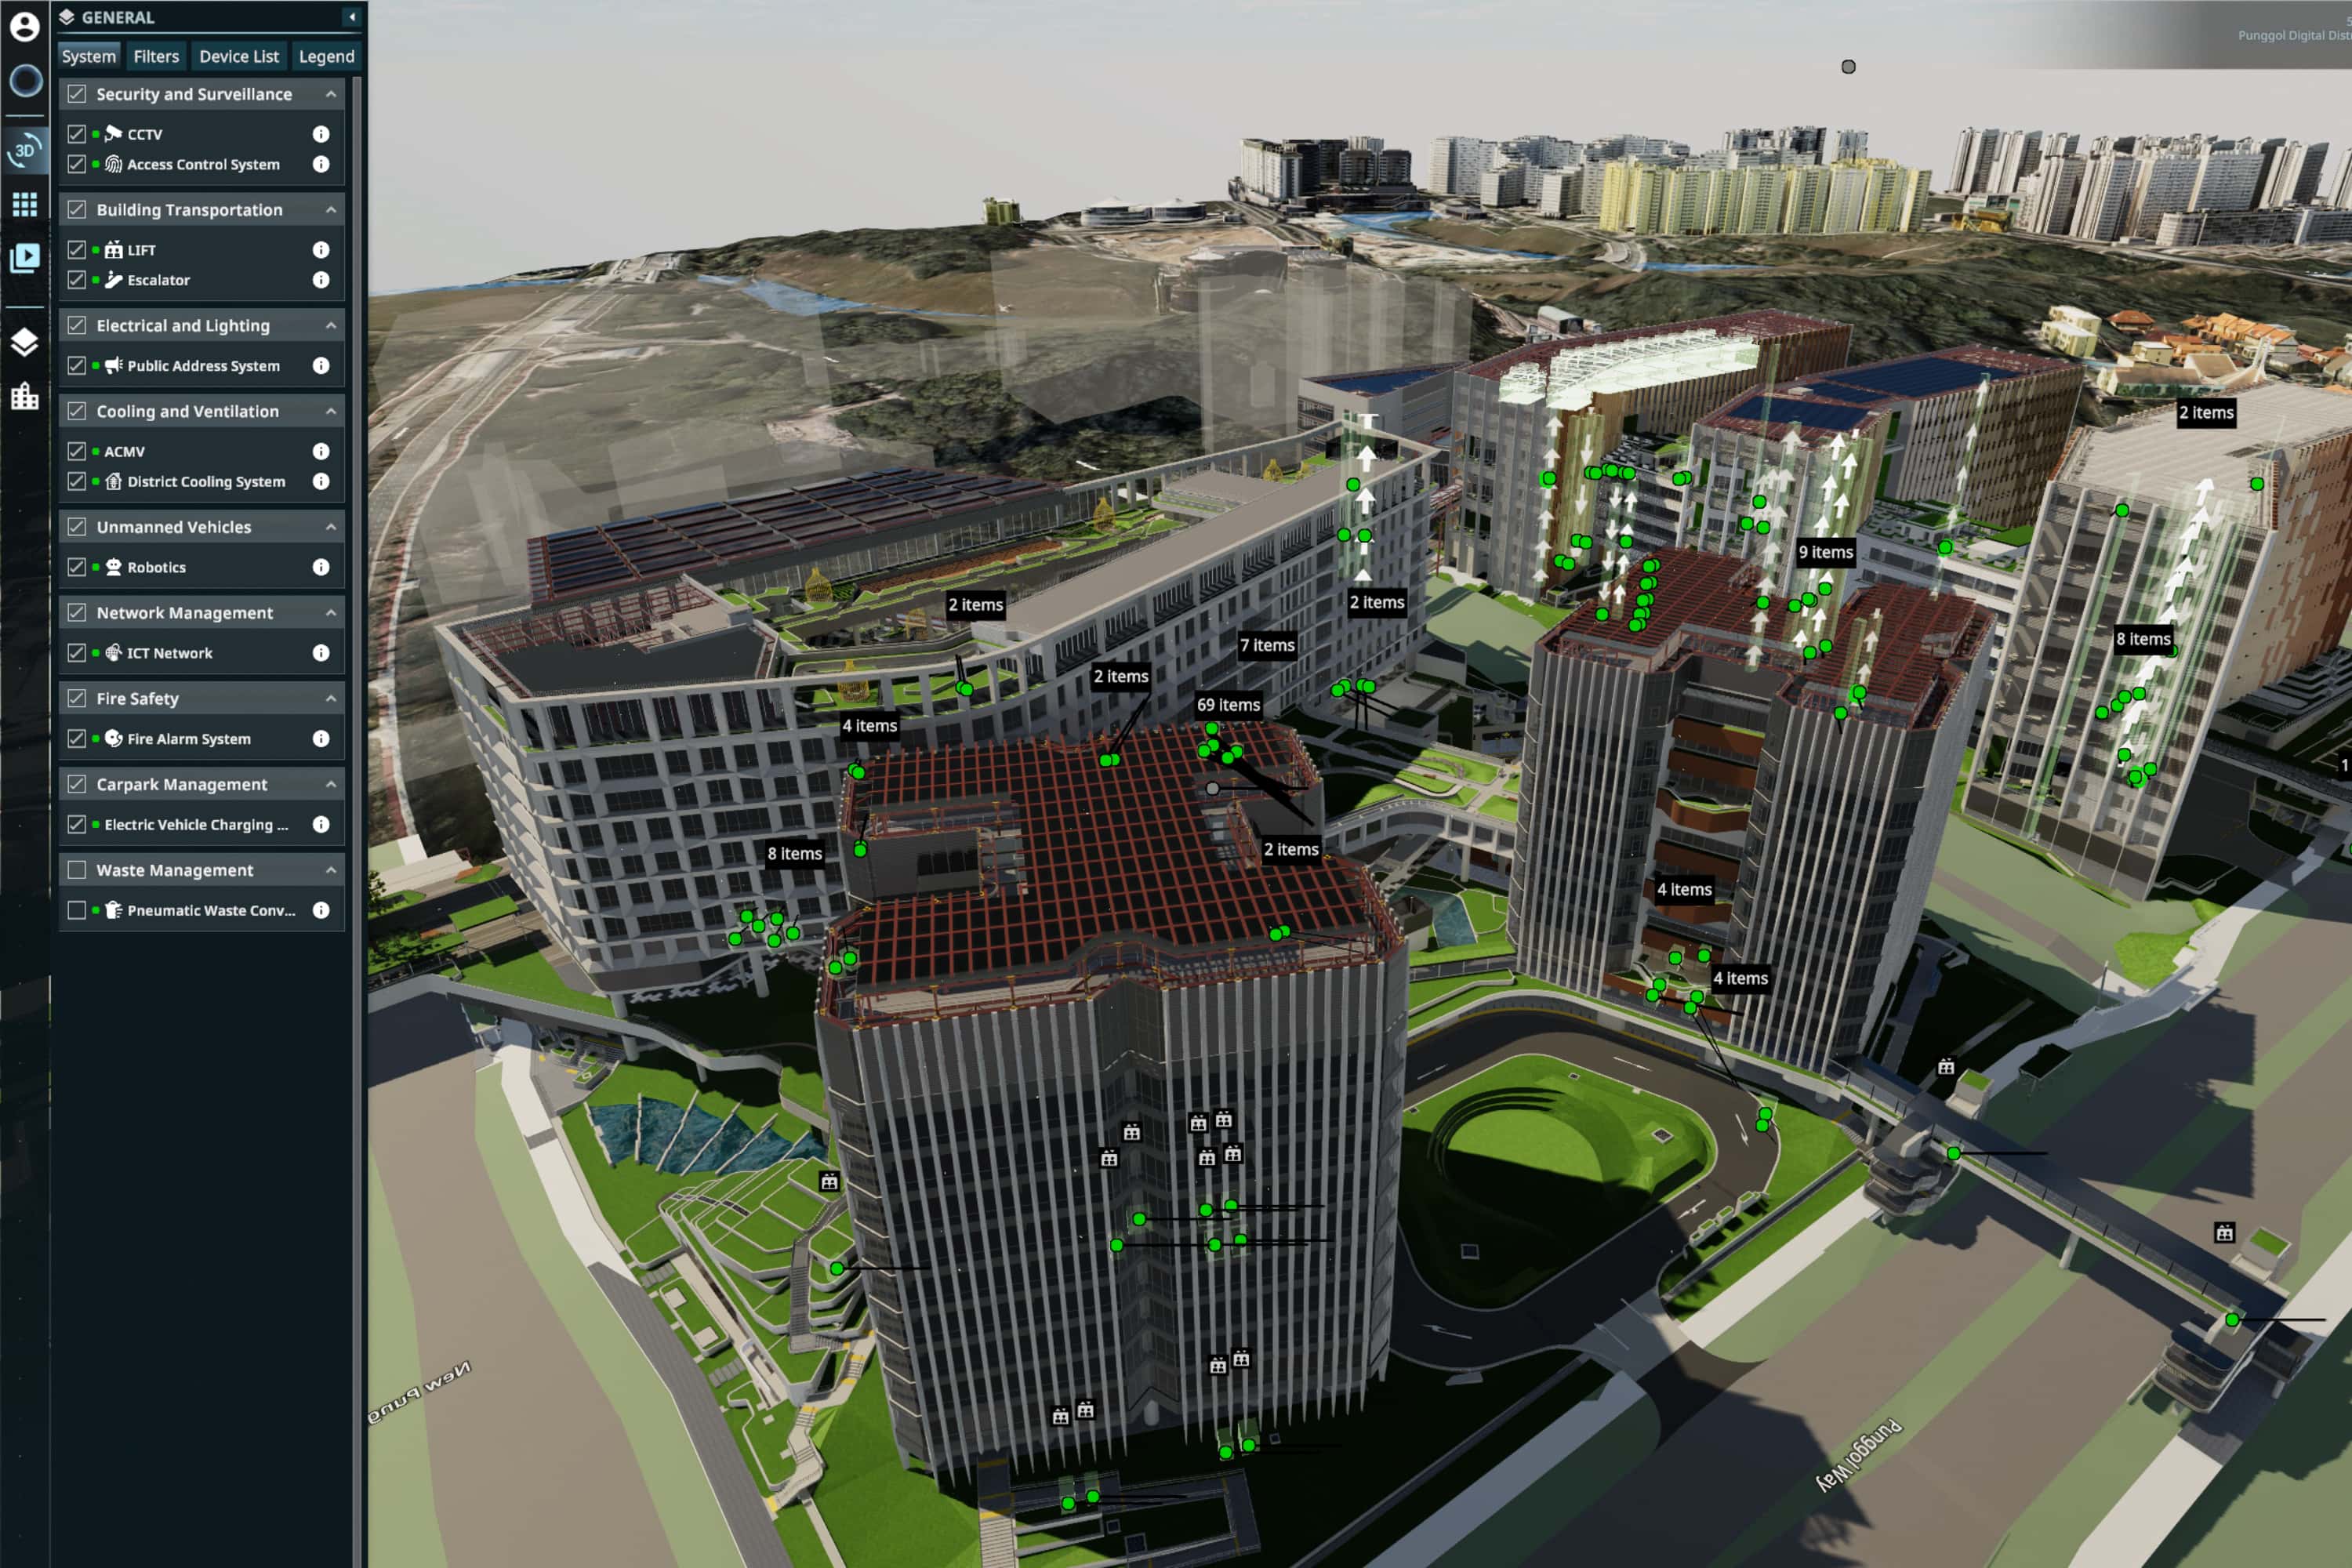 Top-down view of the smart city district with ODP.